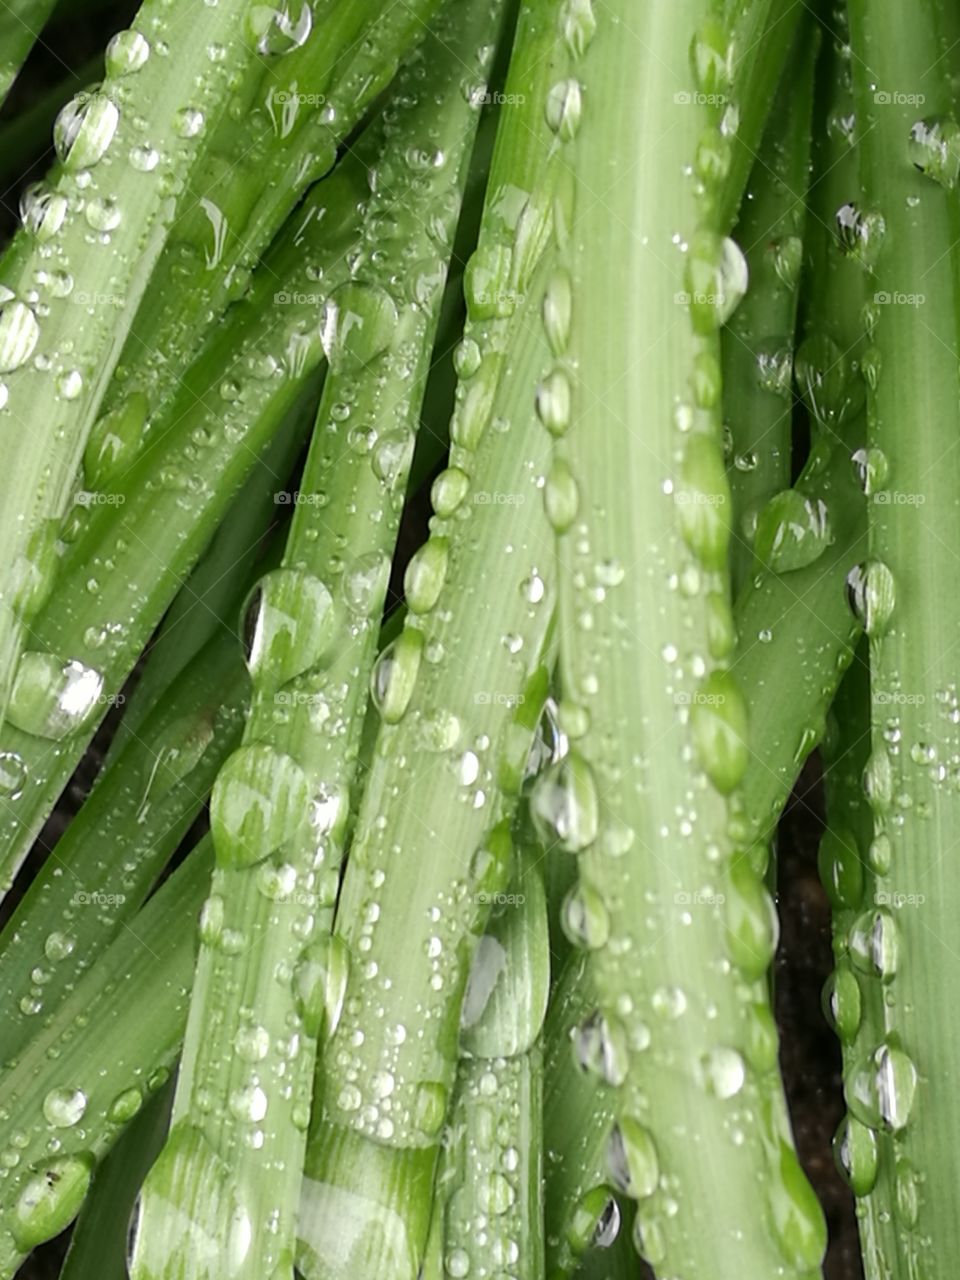 Blades Covered In Drops